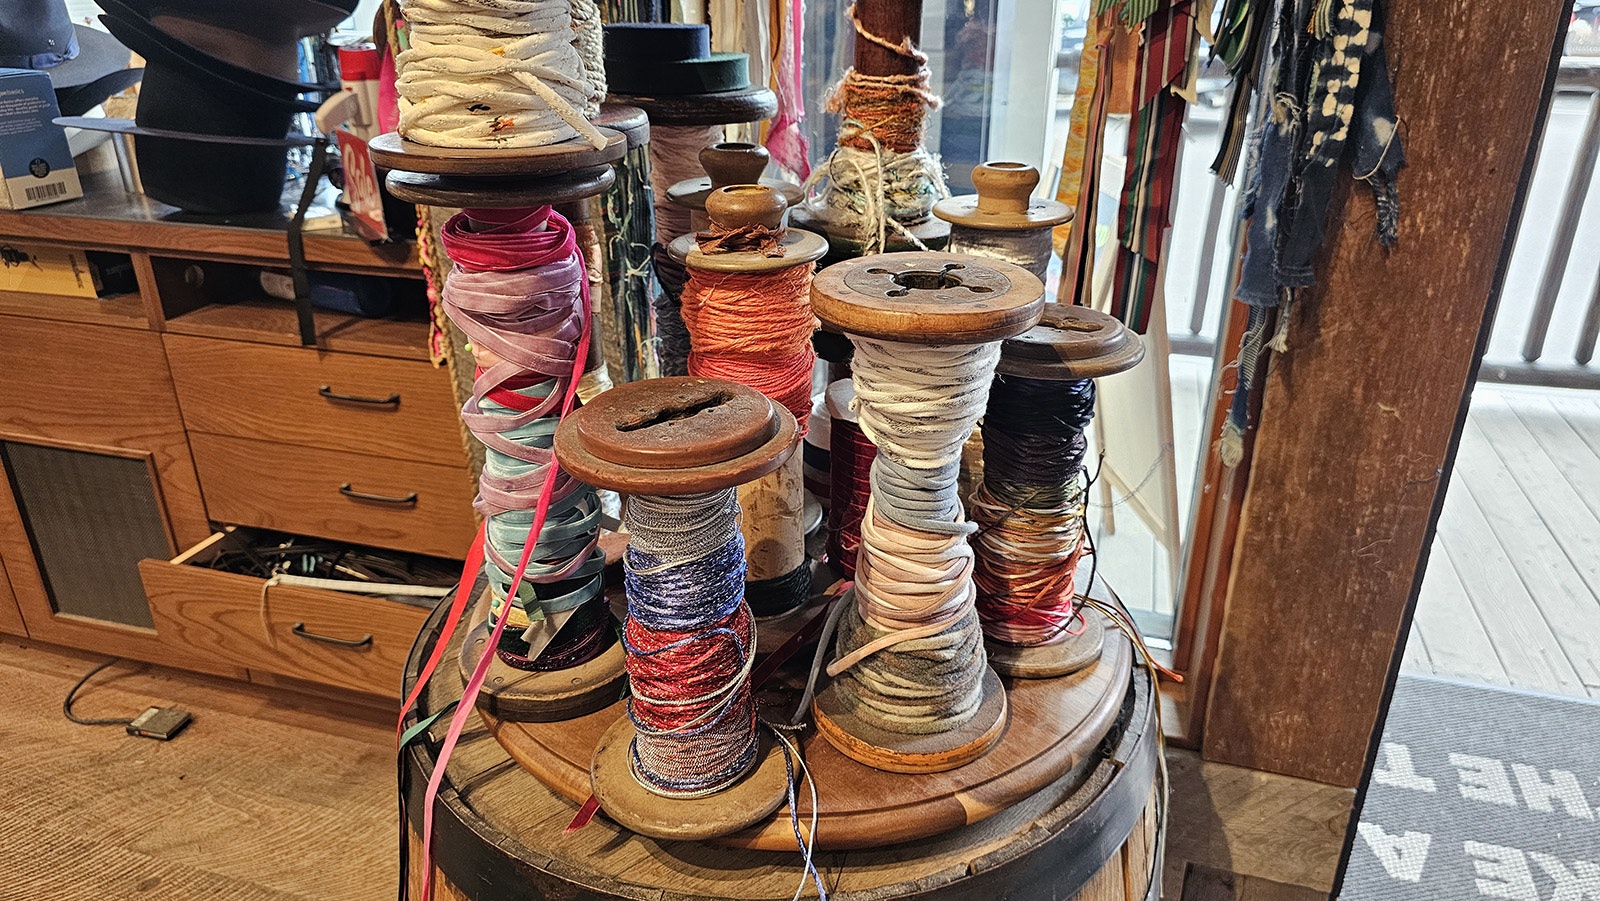 A variety of twine and silk are available for $10 a pop to add color to hat bands.